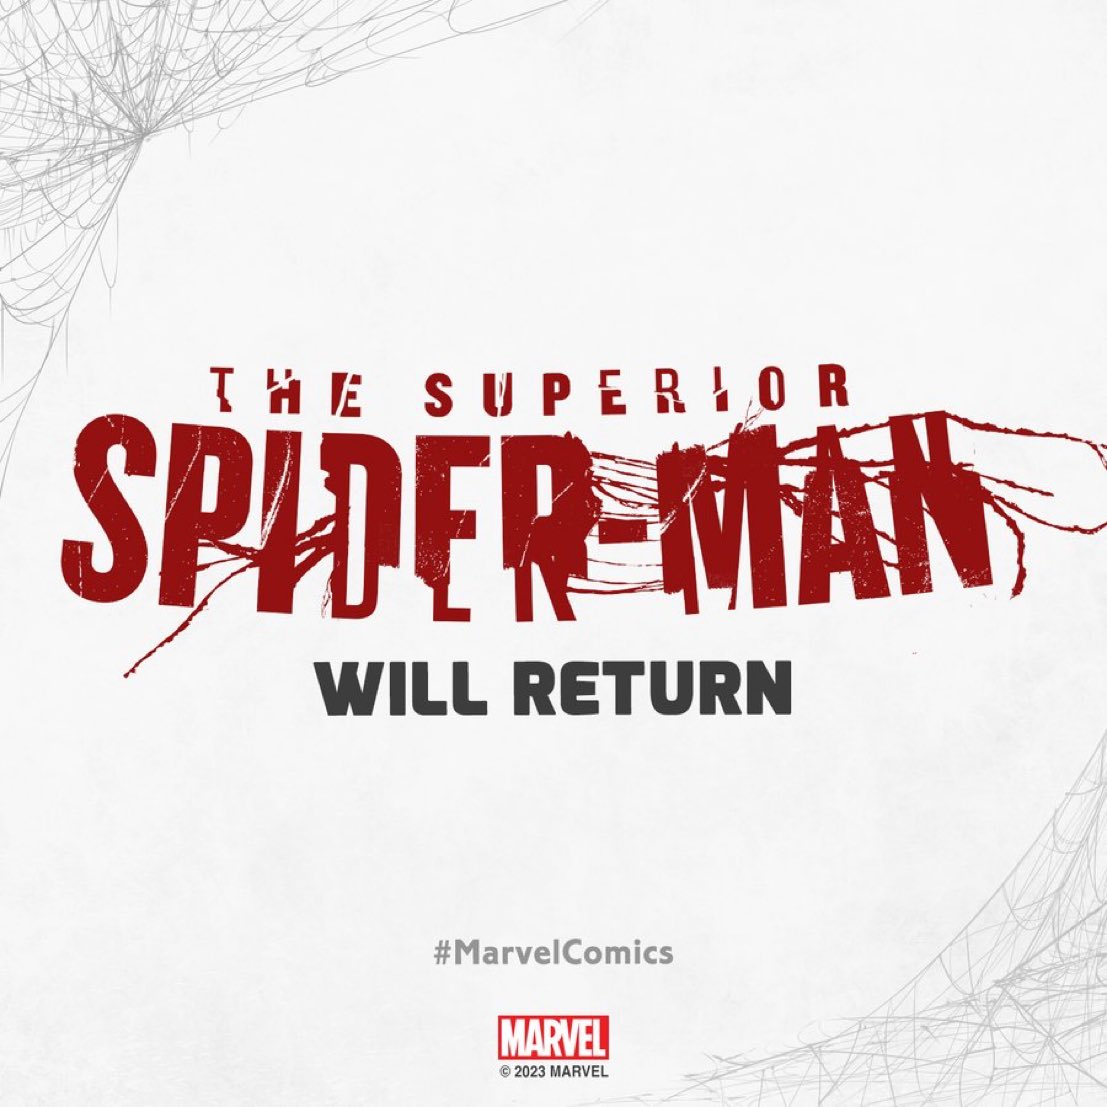 RT @DiscussingFilm: Dan Slott will return with a new ‘SUPERIOR SPIDER-MAN’ series this Fall. https://t.co/QyeWEEnJoP